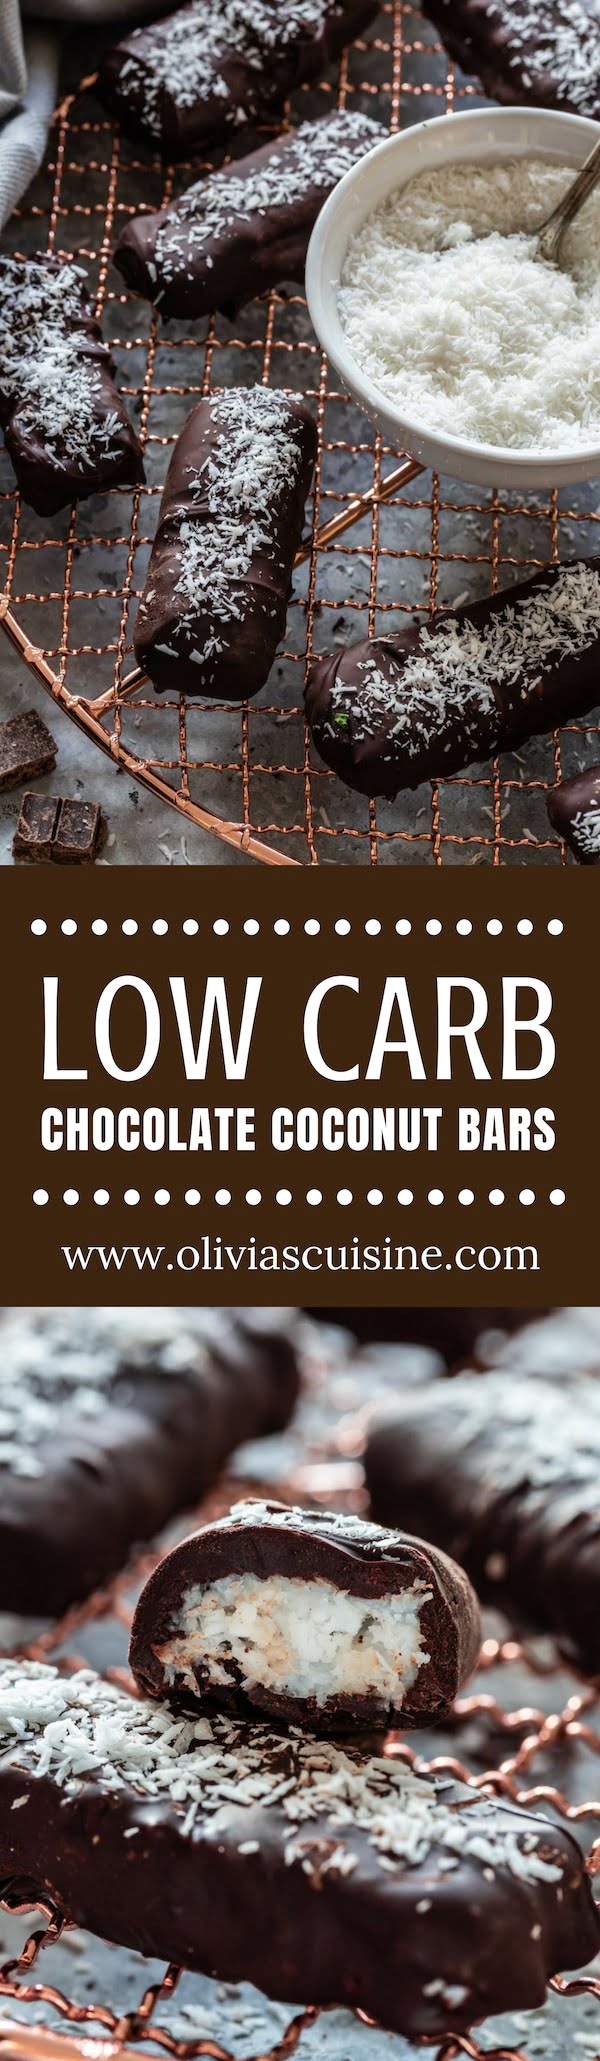 A collage of photos of low carb chocolate coconut bars